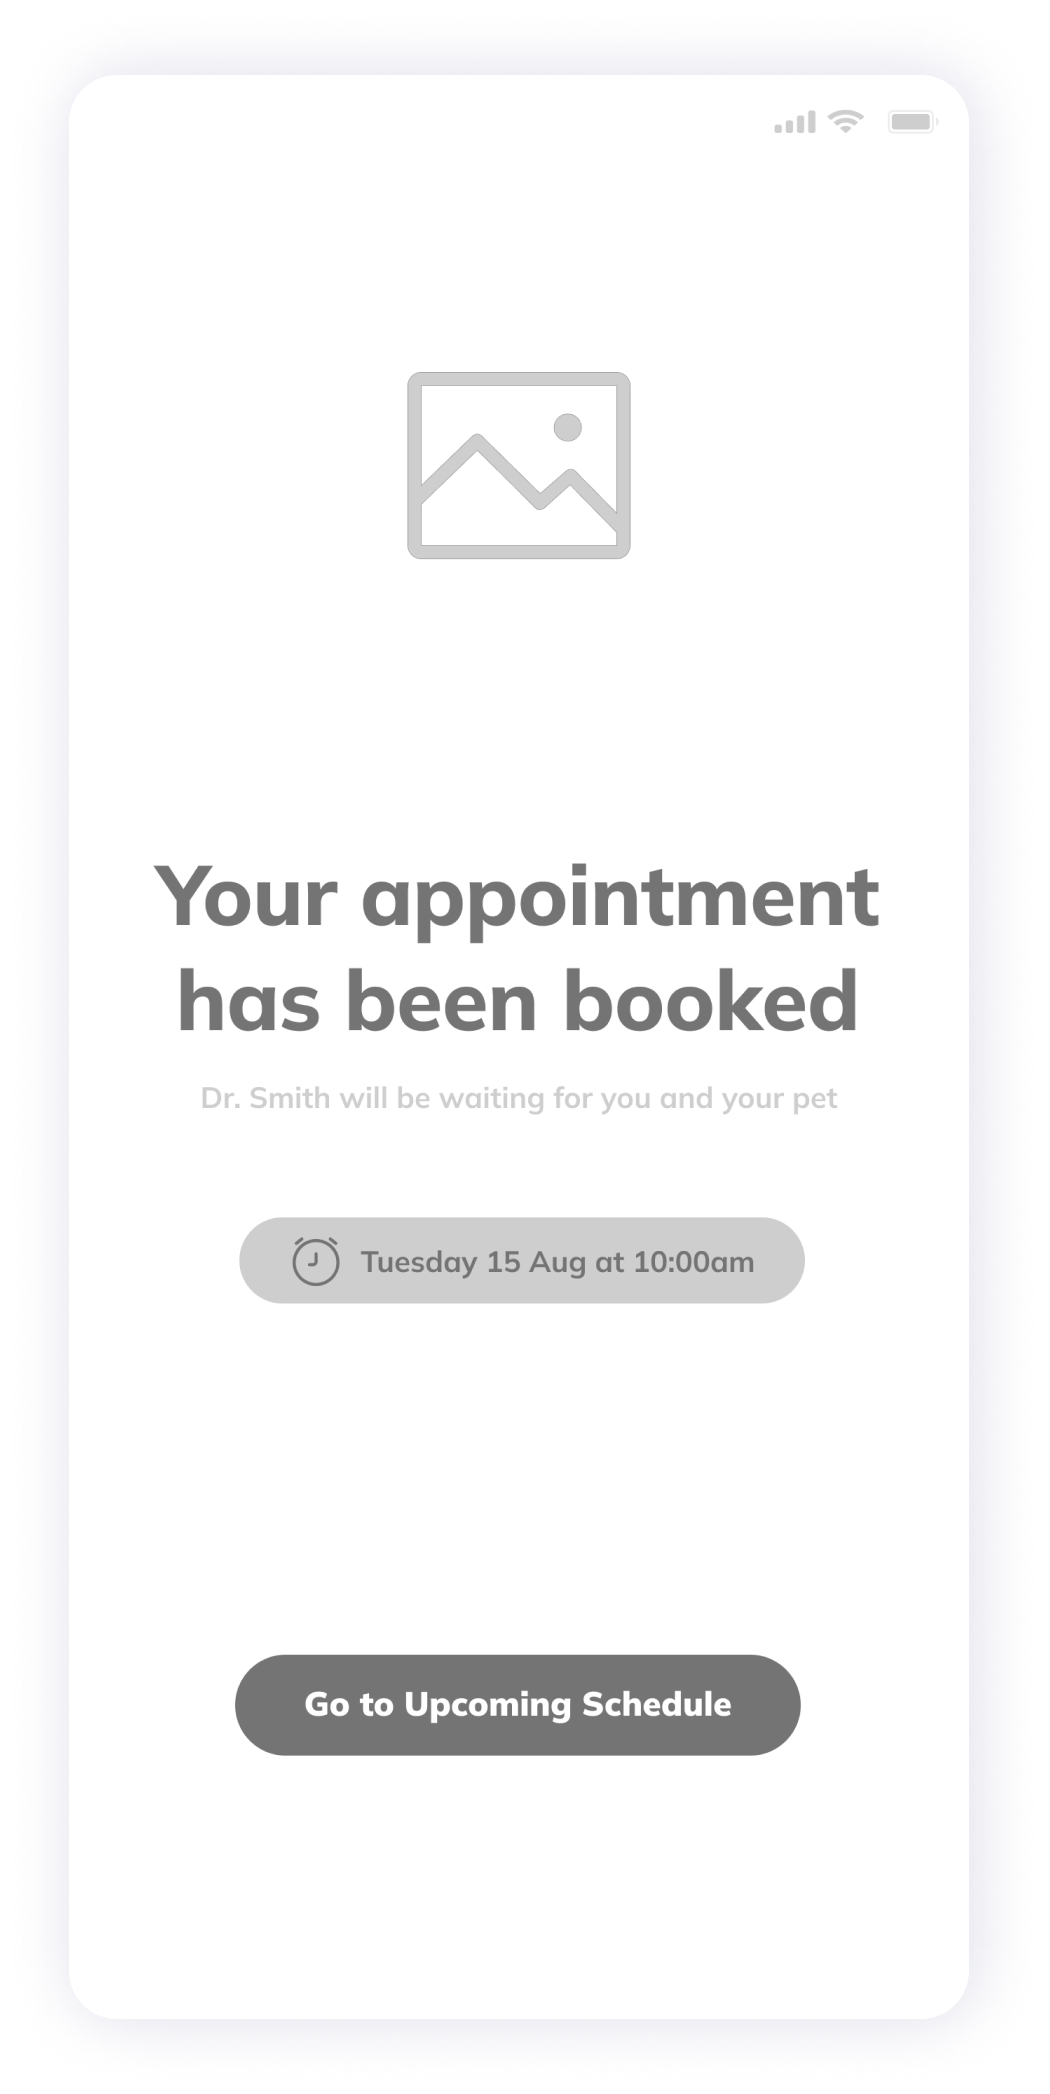  VetPet app appointment booking confirmation screen wireframe